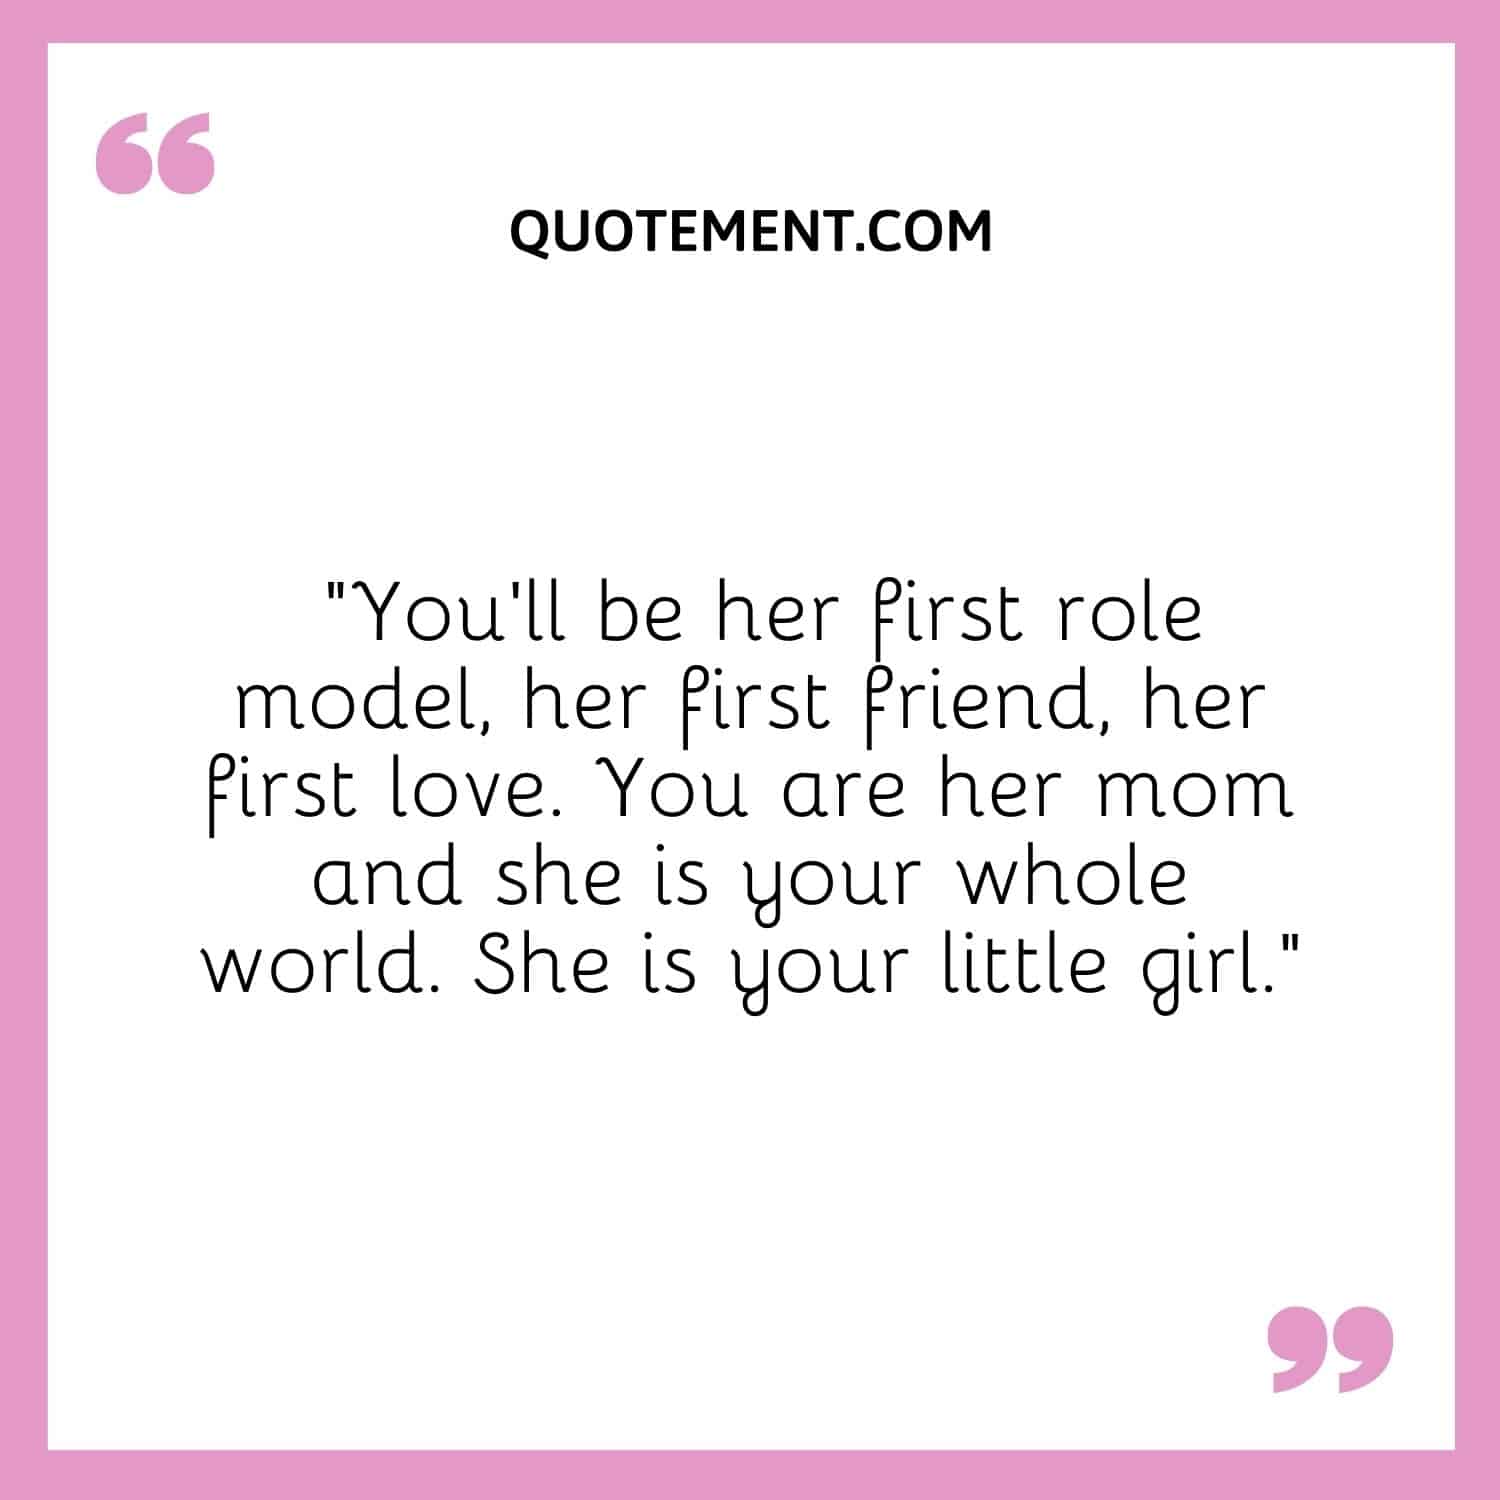 You’ll be her first role model